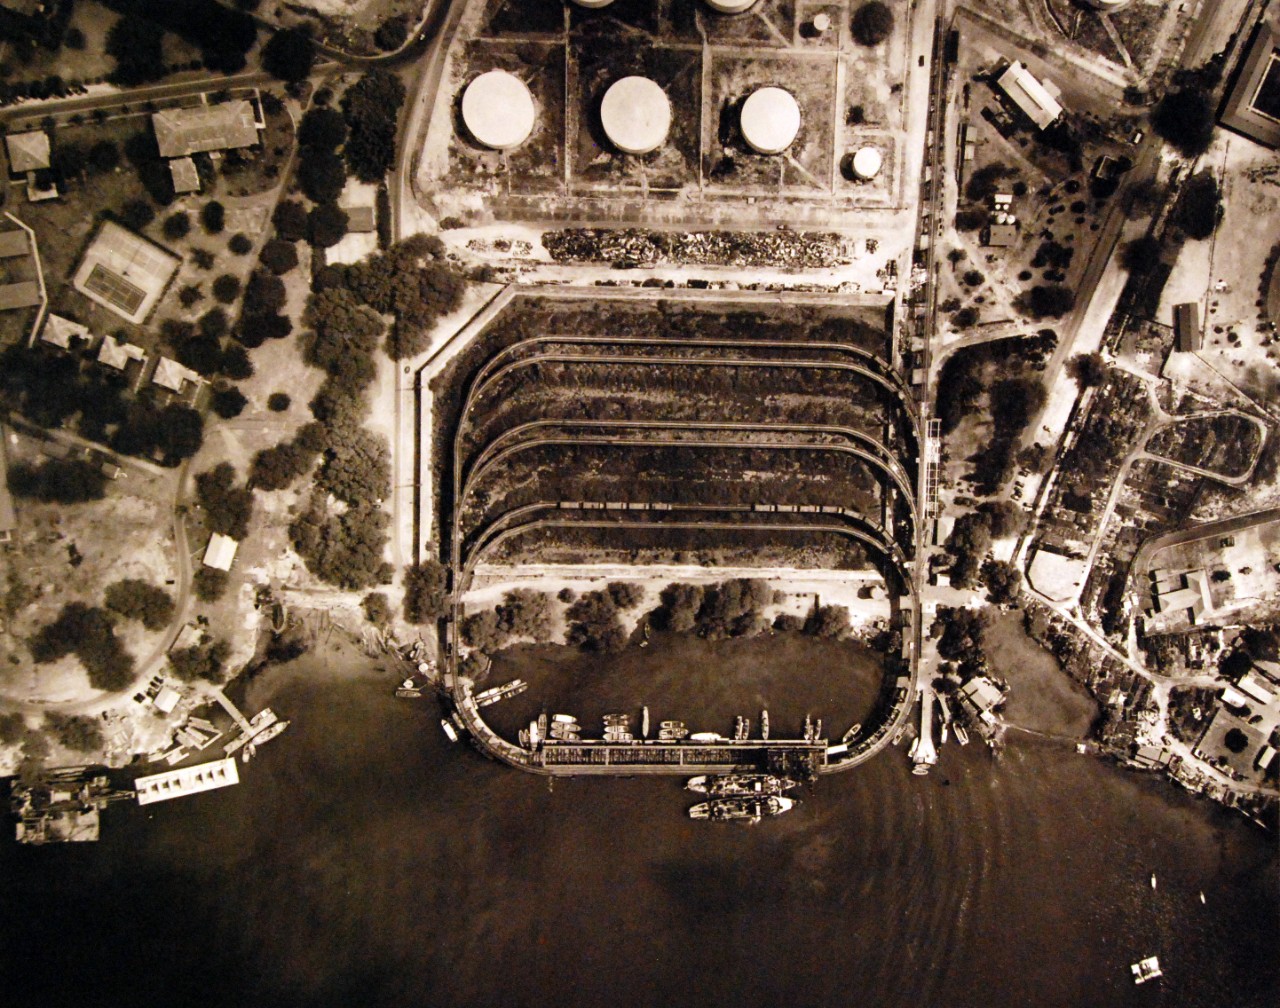 80-G-182878:   Pearl Harbor, Territory of Hawaii, October 16, 1941.   Aerial view showing the fuel depot, coal docks, and upper tank farm, Navy Yard, Pearl Harbor, taken by aircraft from Naval Air Station, Pearl Harbor. U.S. Navy photograph, now in the collections of the National Archives (9/9/2015).